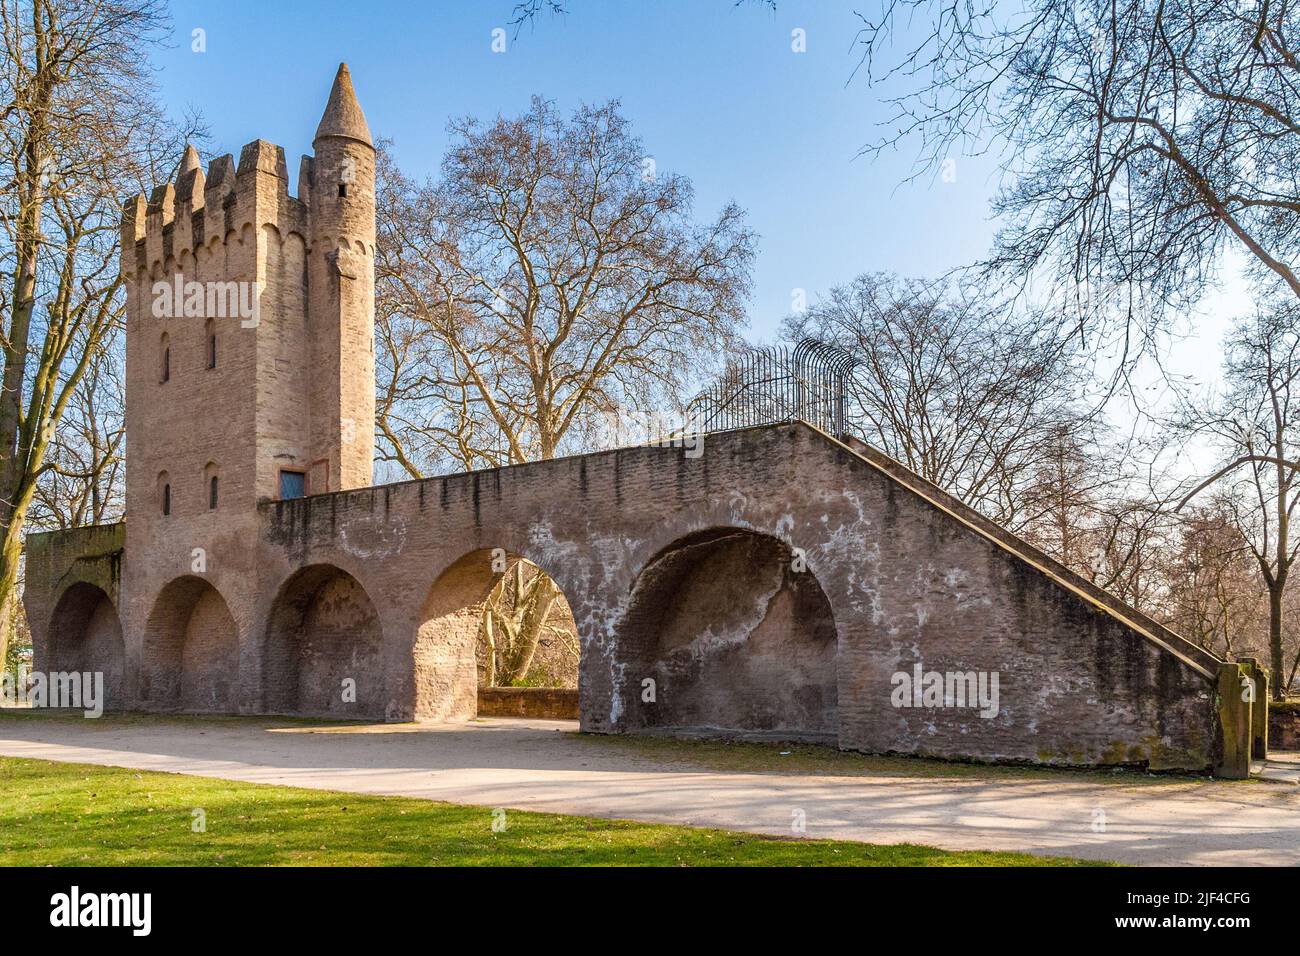 Lovely view of the Heidentürmchen, a remainder of the medieval town fortifications located in the eastern cathedral garden of Speyer, Germany. The... Stock Photo